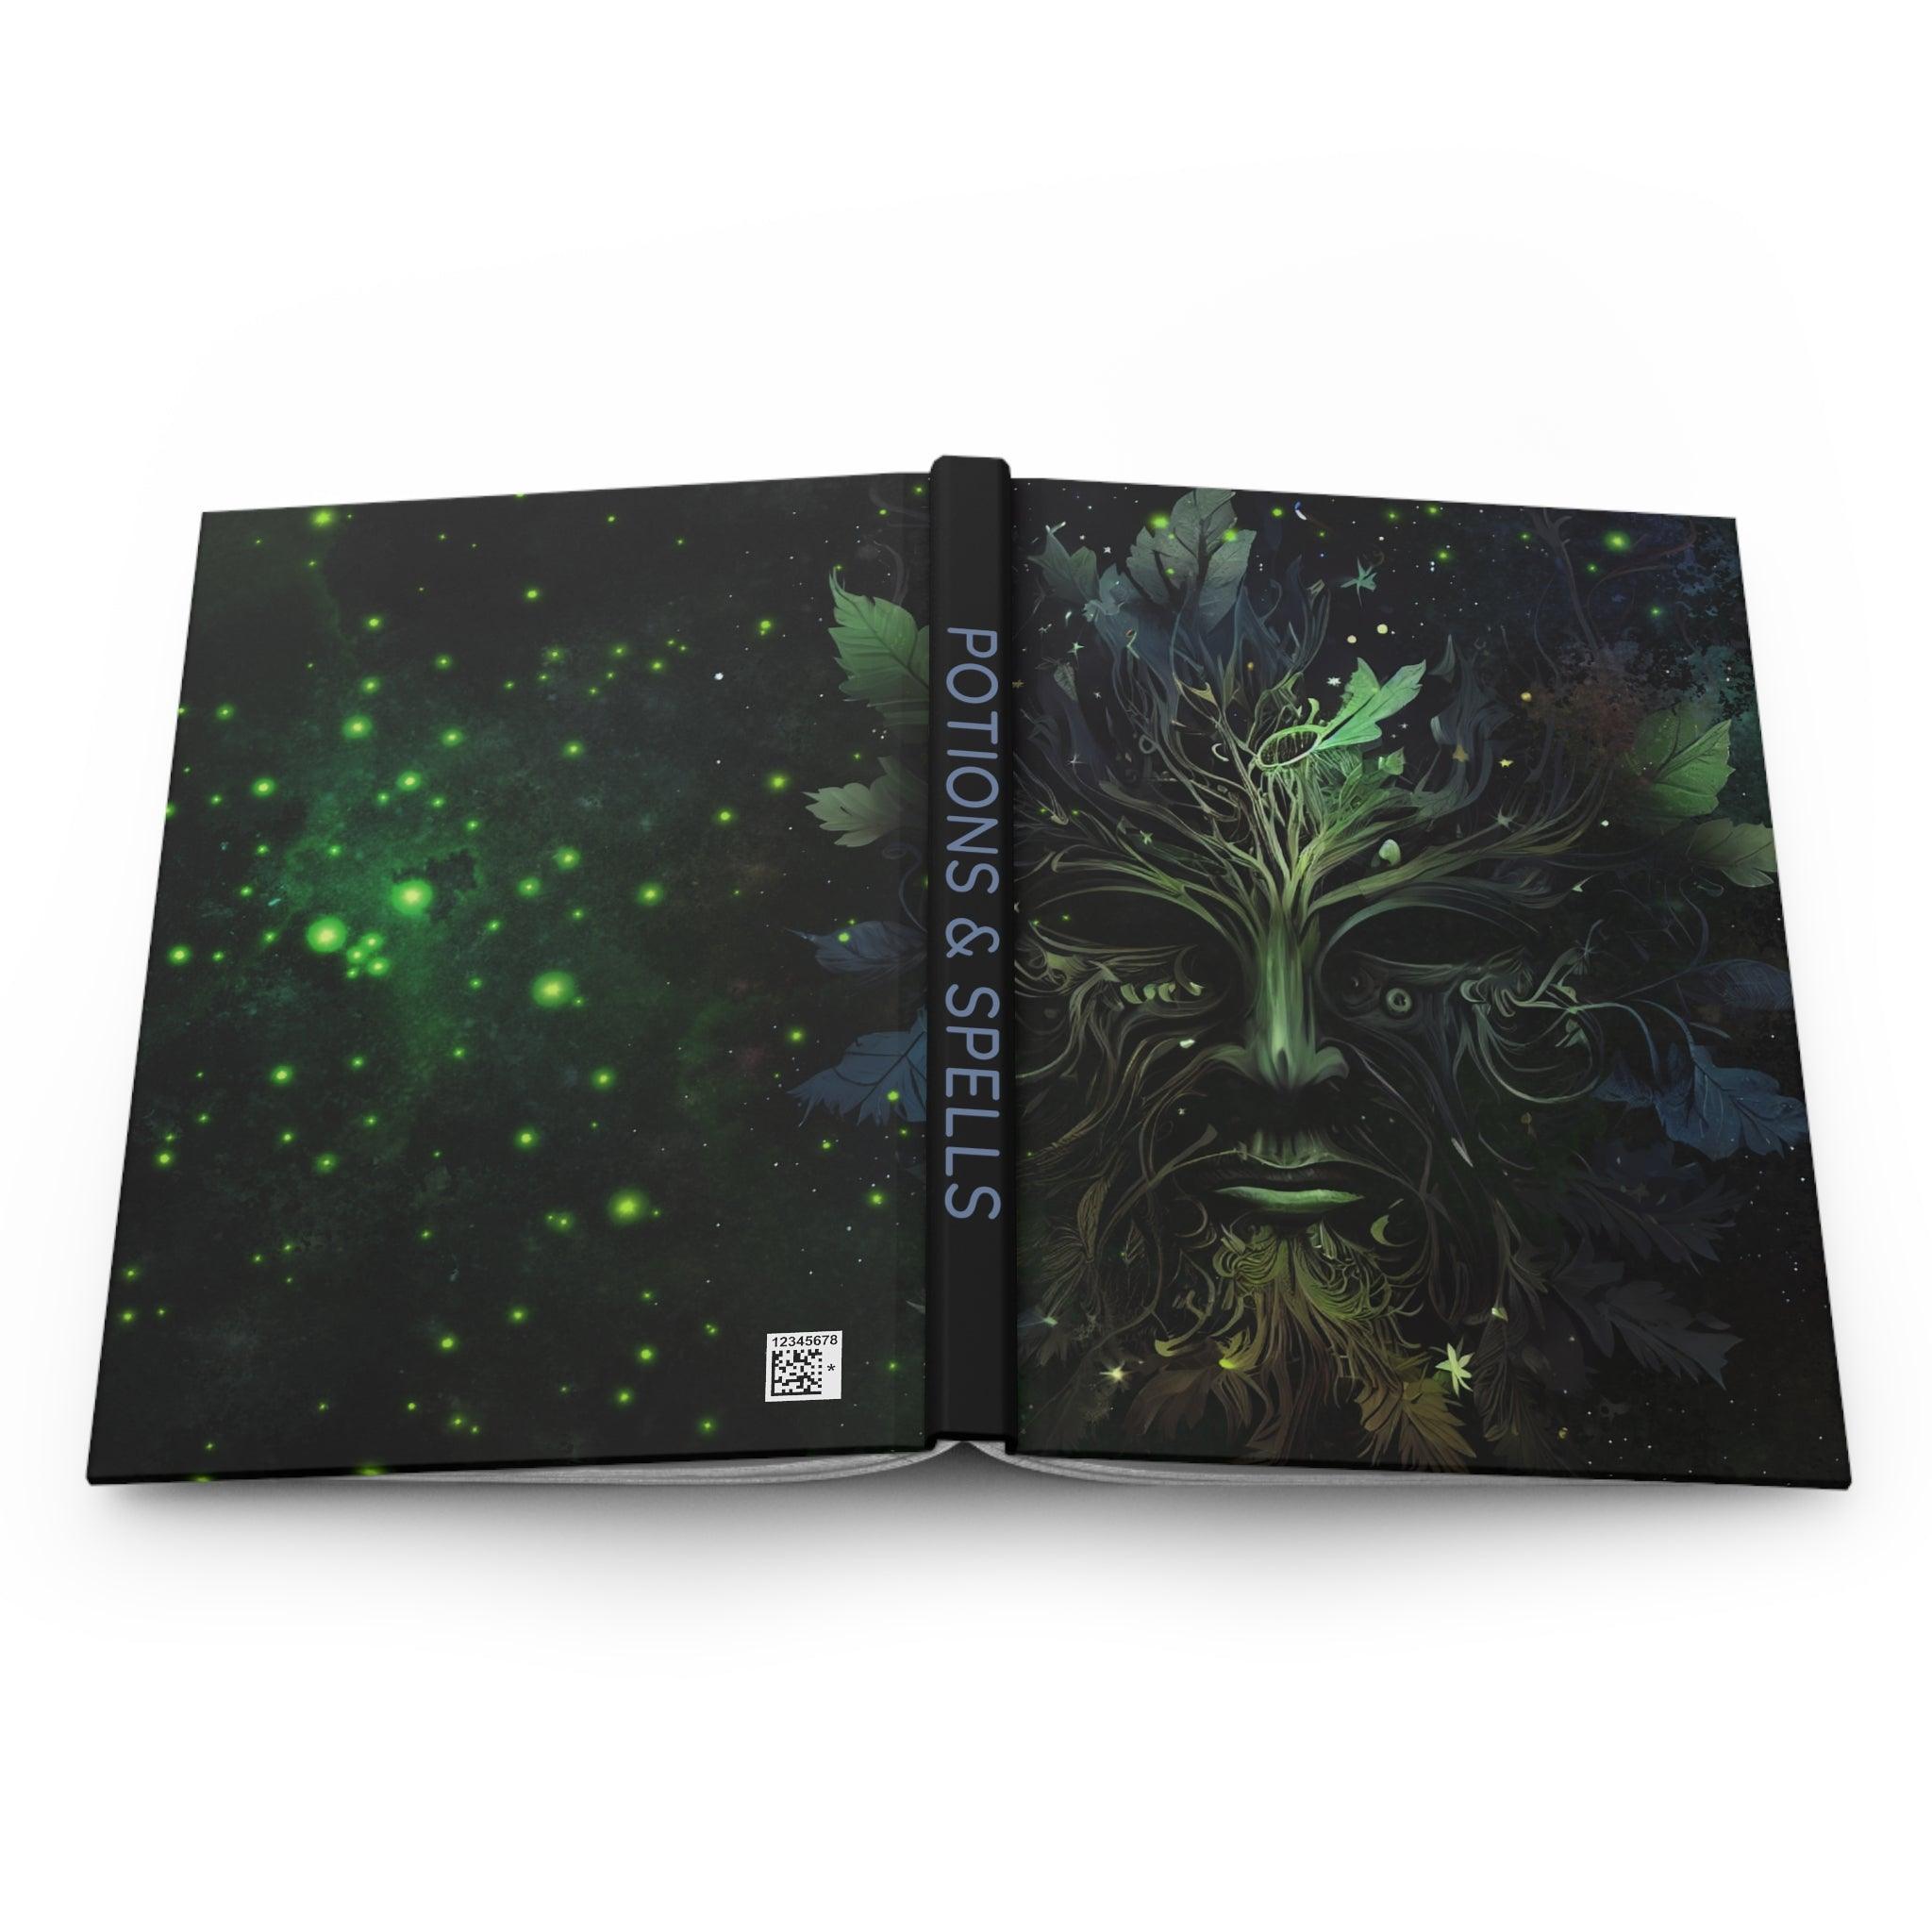 Book of Potions & Spells, Dryad Wood Nymph, Grimoire, Book of Shadows, Forest Witch Hardcover Matte Journal | lovevisionkarma.com